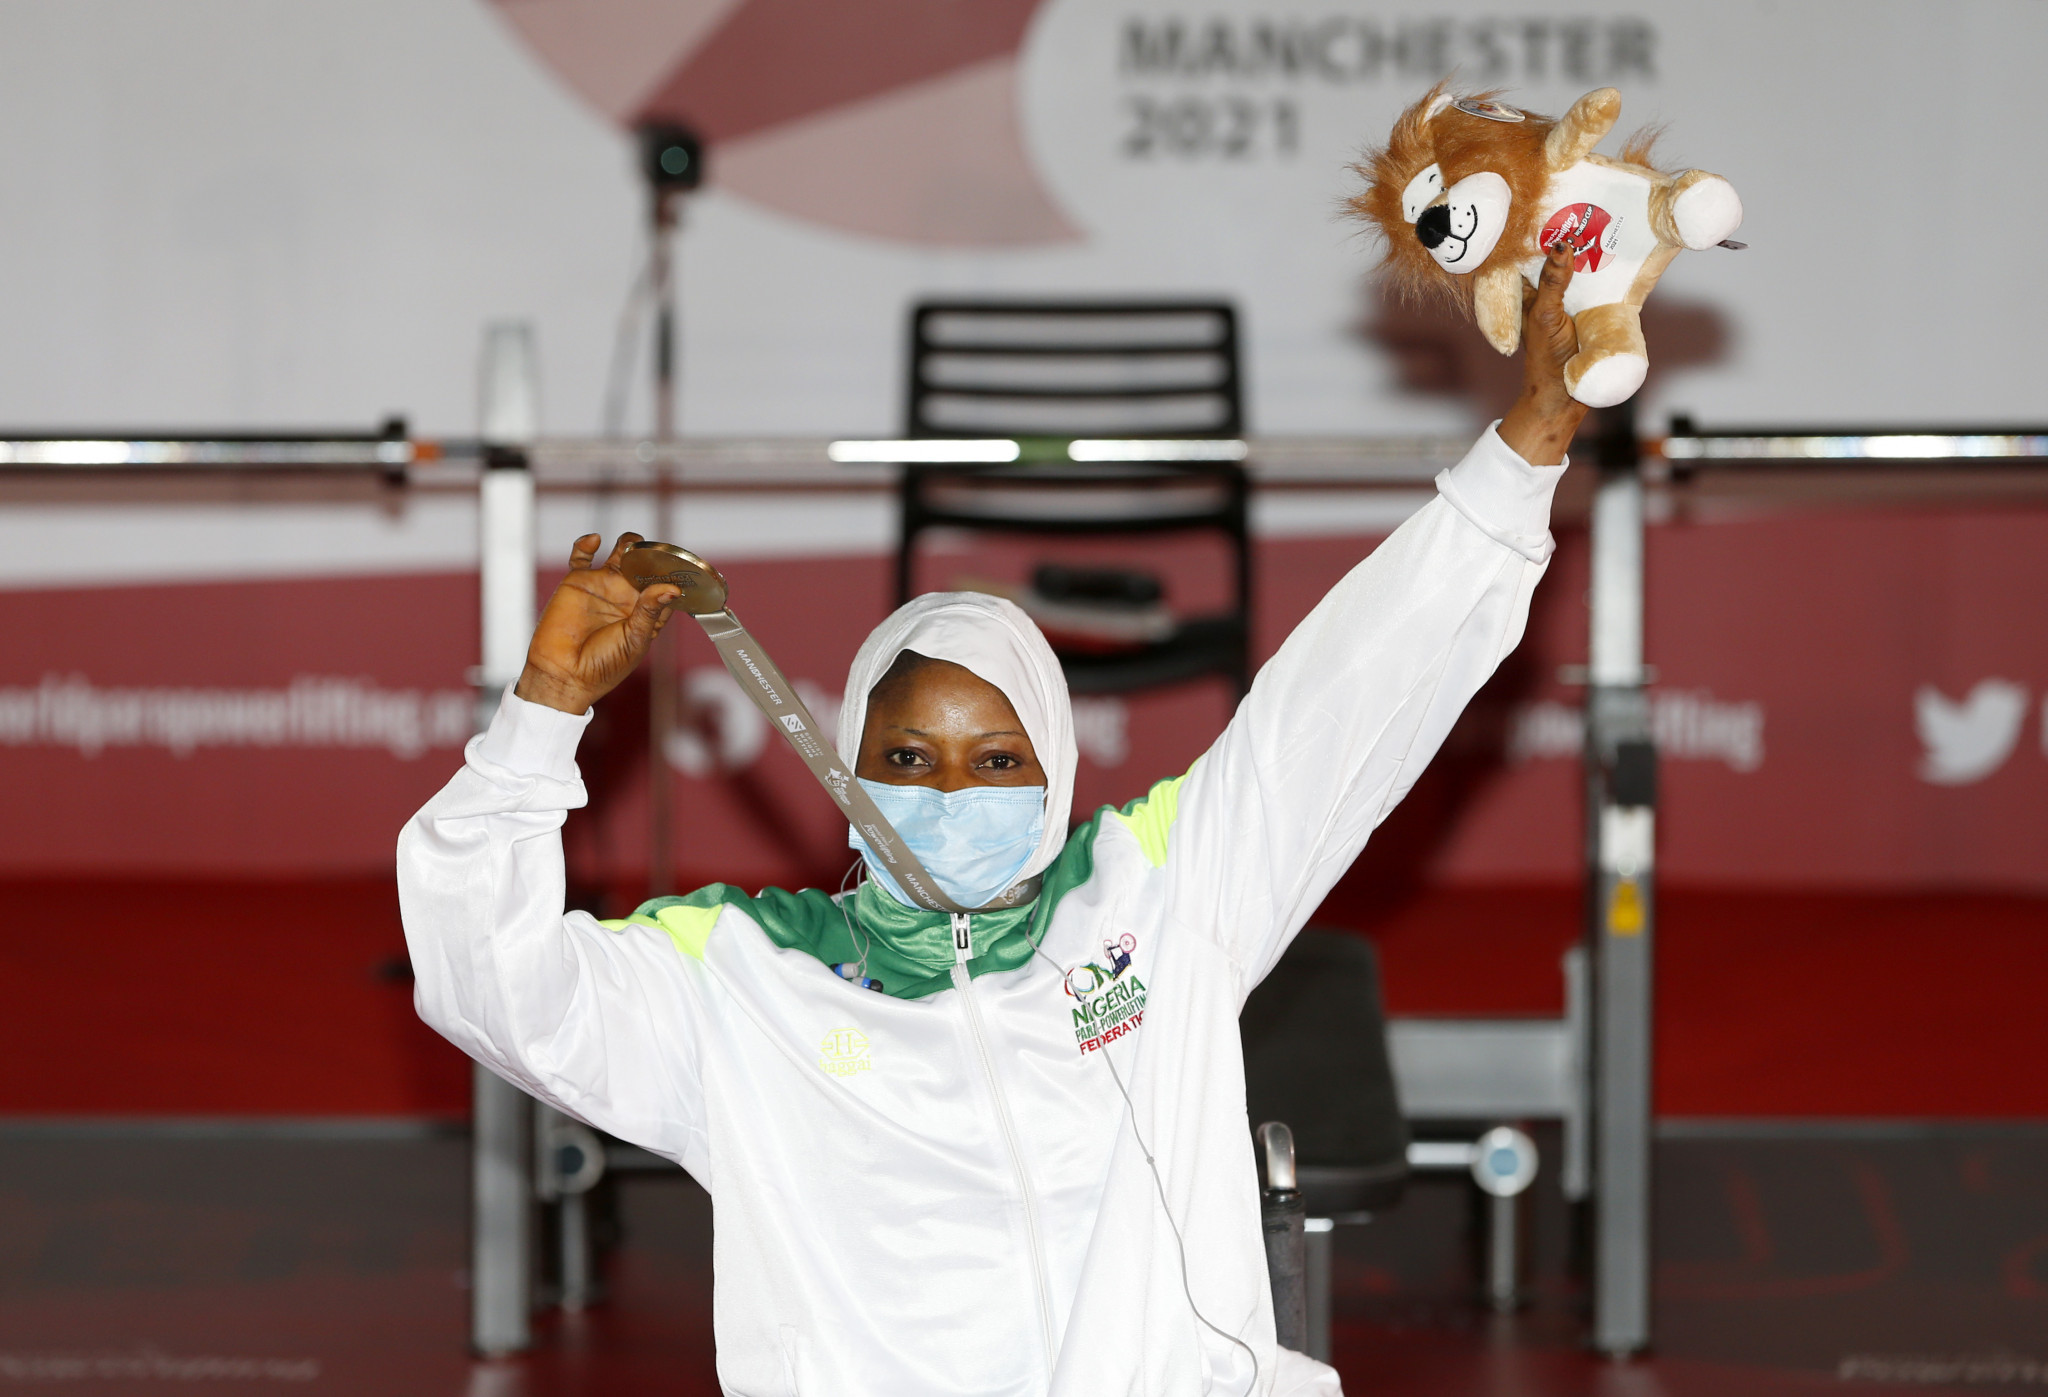 Latifat Tijani secured one of Nigeria's three gold medals on day one in Manchester ©SWpix